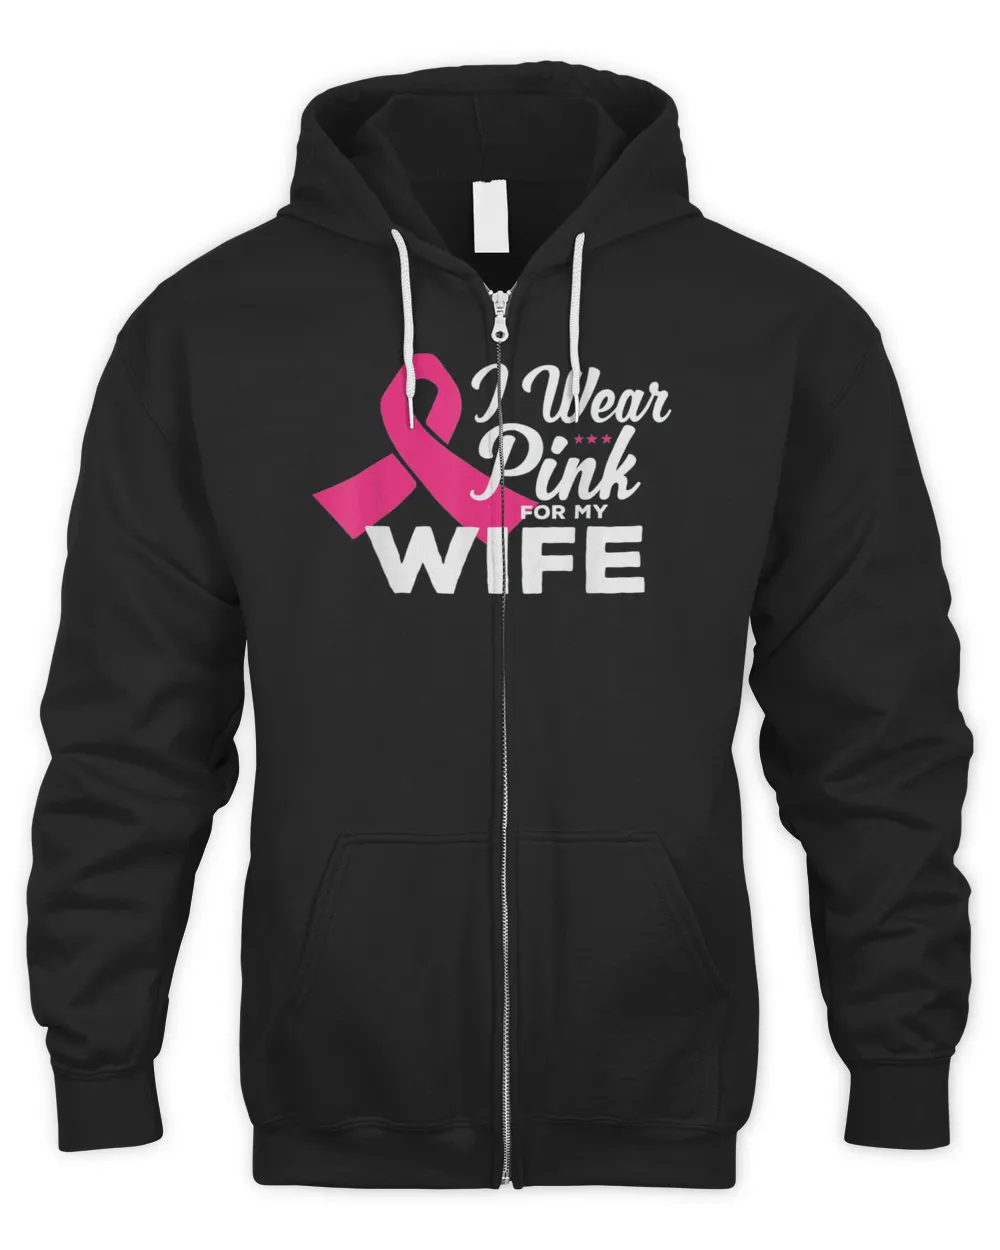 I wear pink for my wife breast cancer Awareness pink ribbon T-Shirt